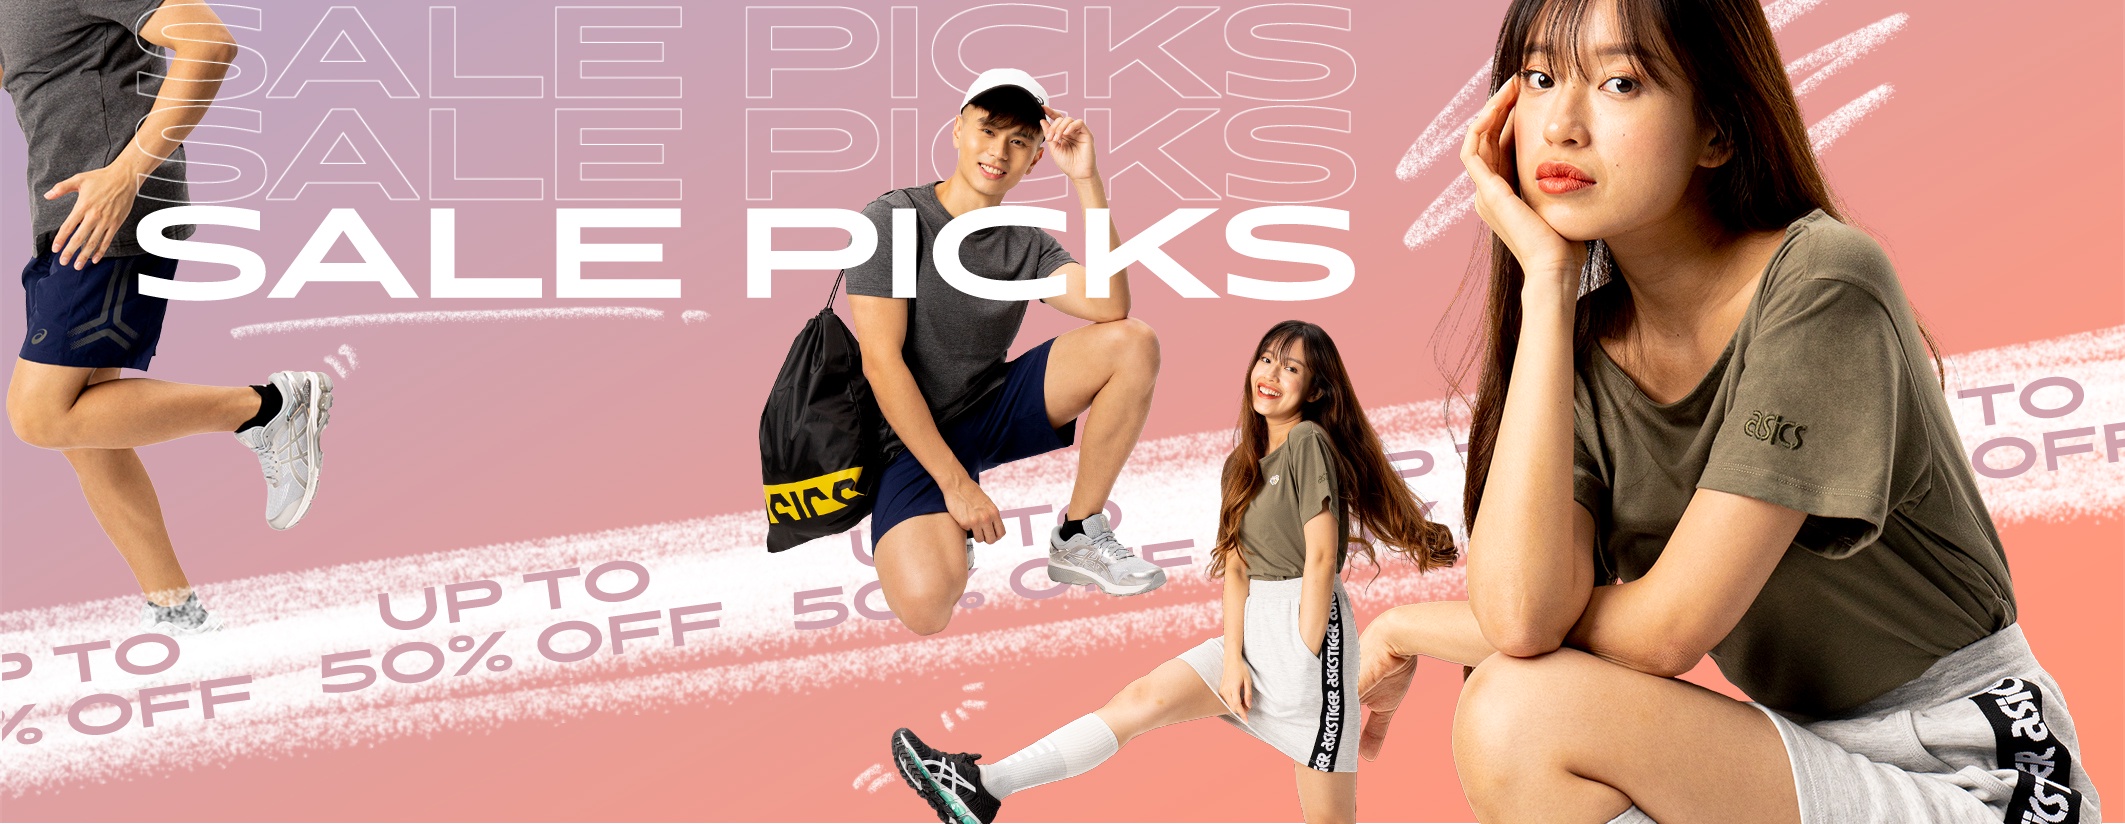 Sale Picks Up To 50% Off | ASICS Malaysia Official